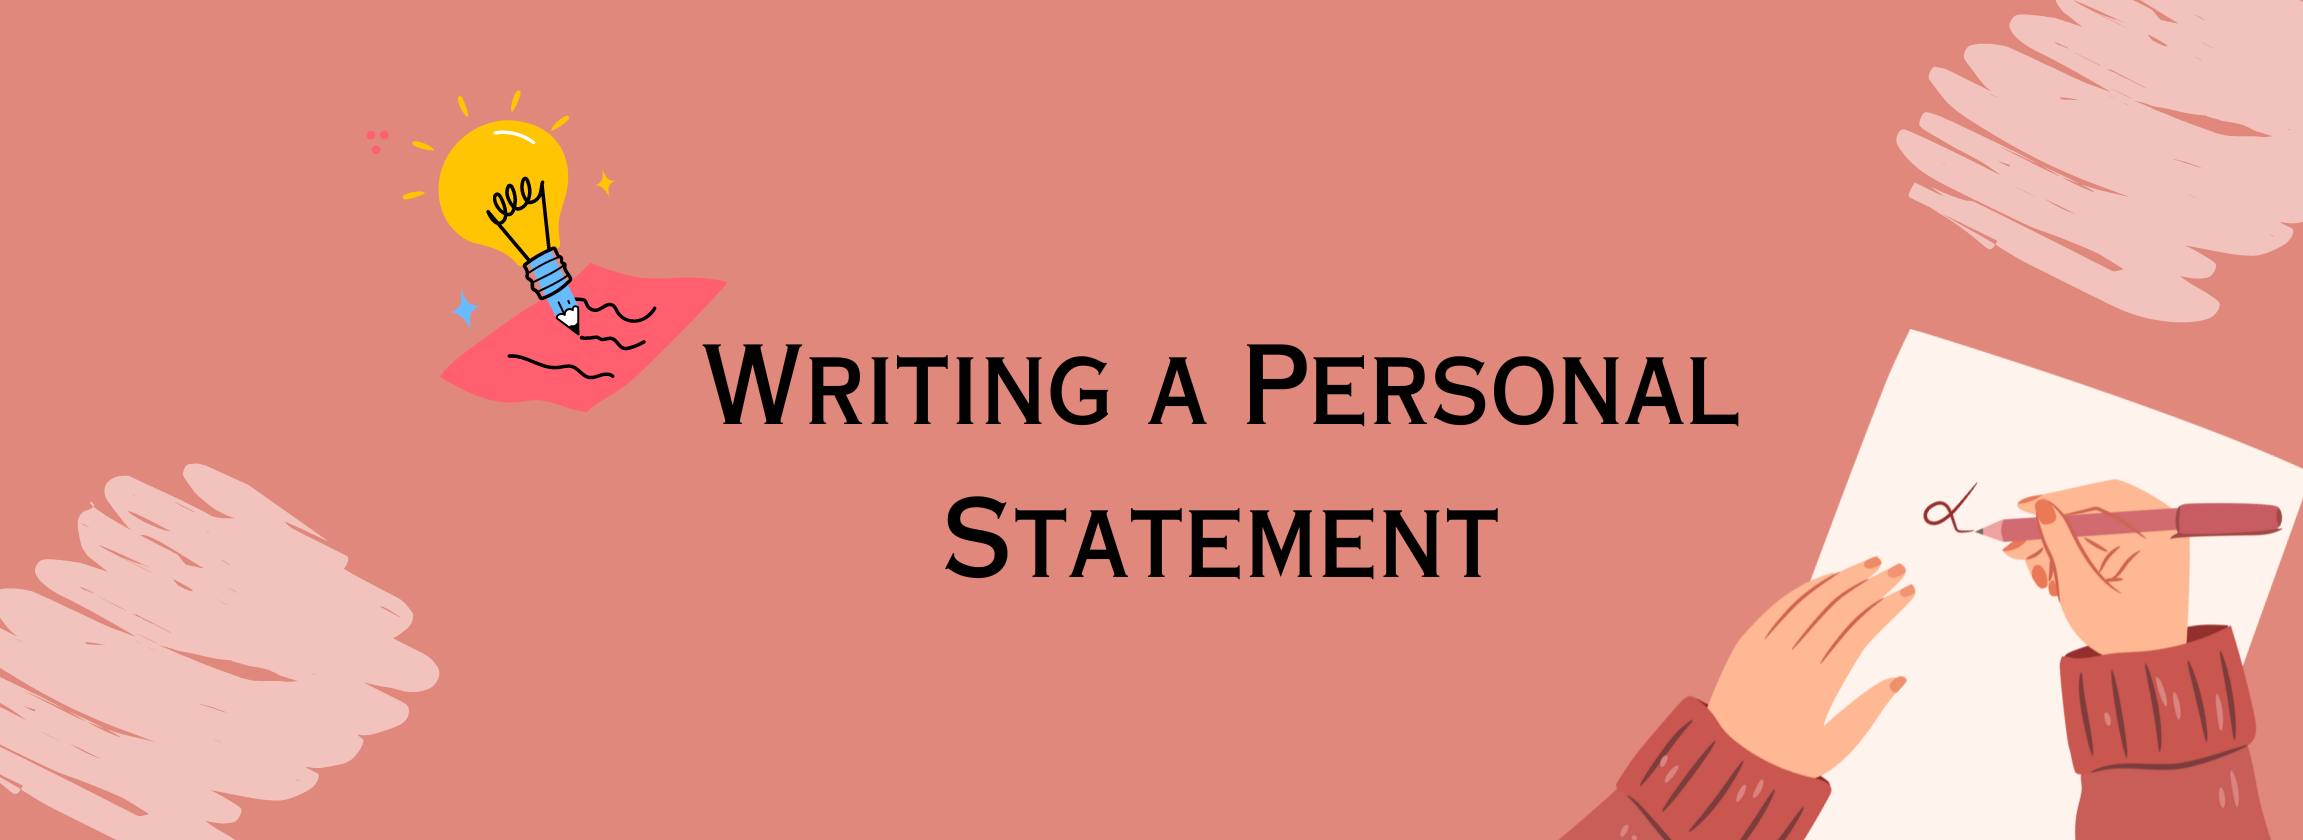 how to write a good personal statement for university examples